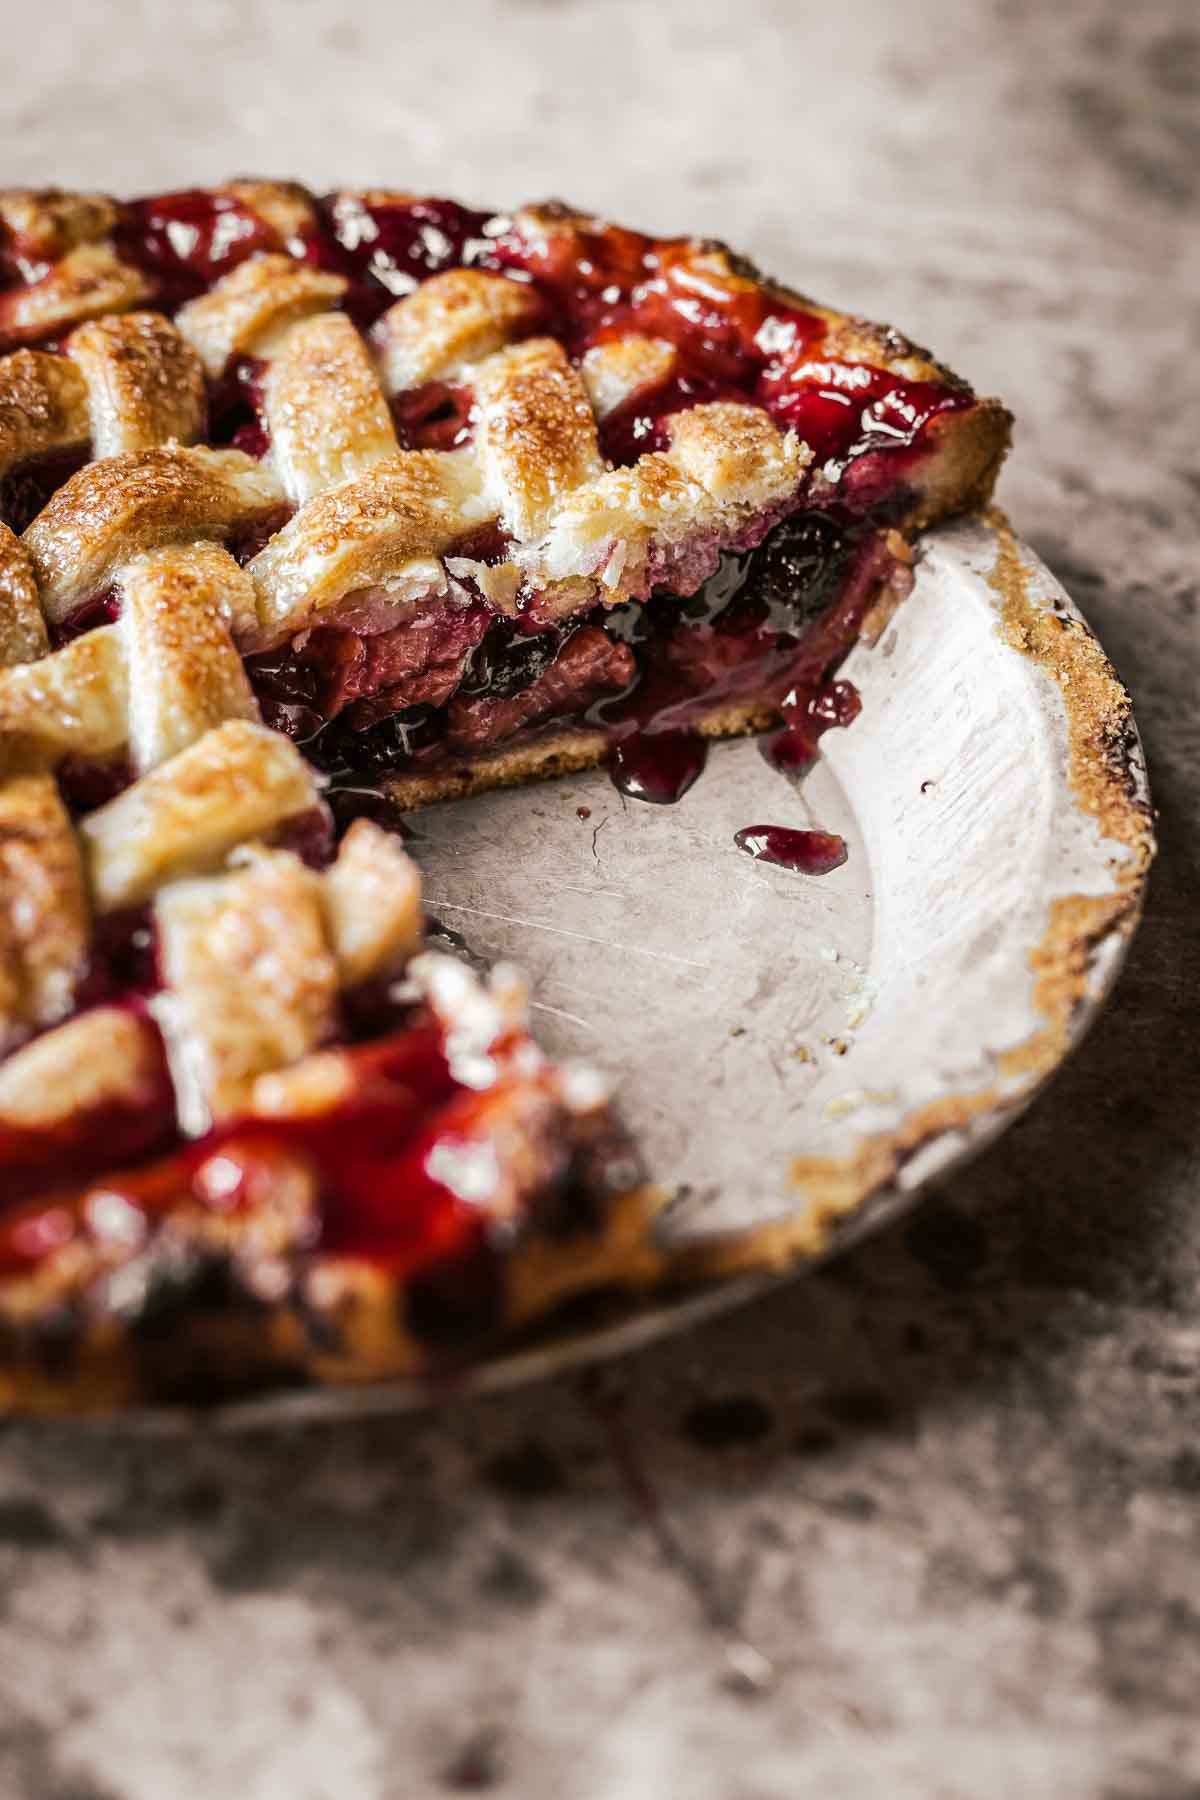 A cherry rhubarb pie in a vintage pie pan with a slice removed, revealing the side view of the sliced pie.